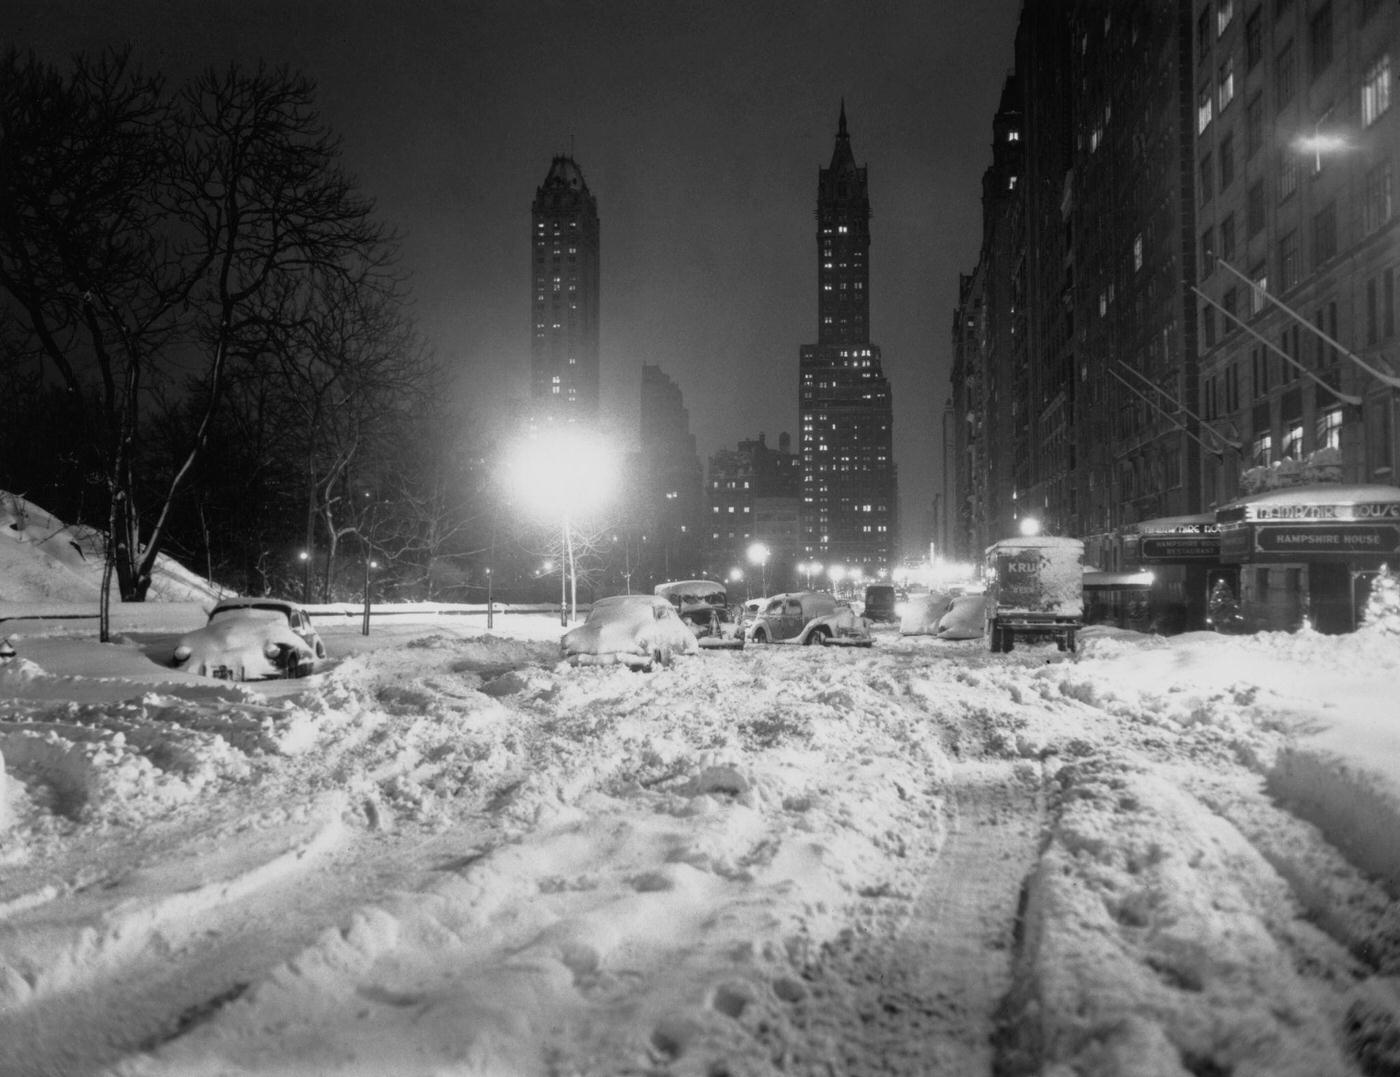 Cars Abandoned Outside The Hampshire House Hotel During The Great Blizzard, Manhattan, 1947